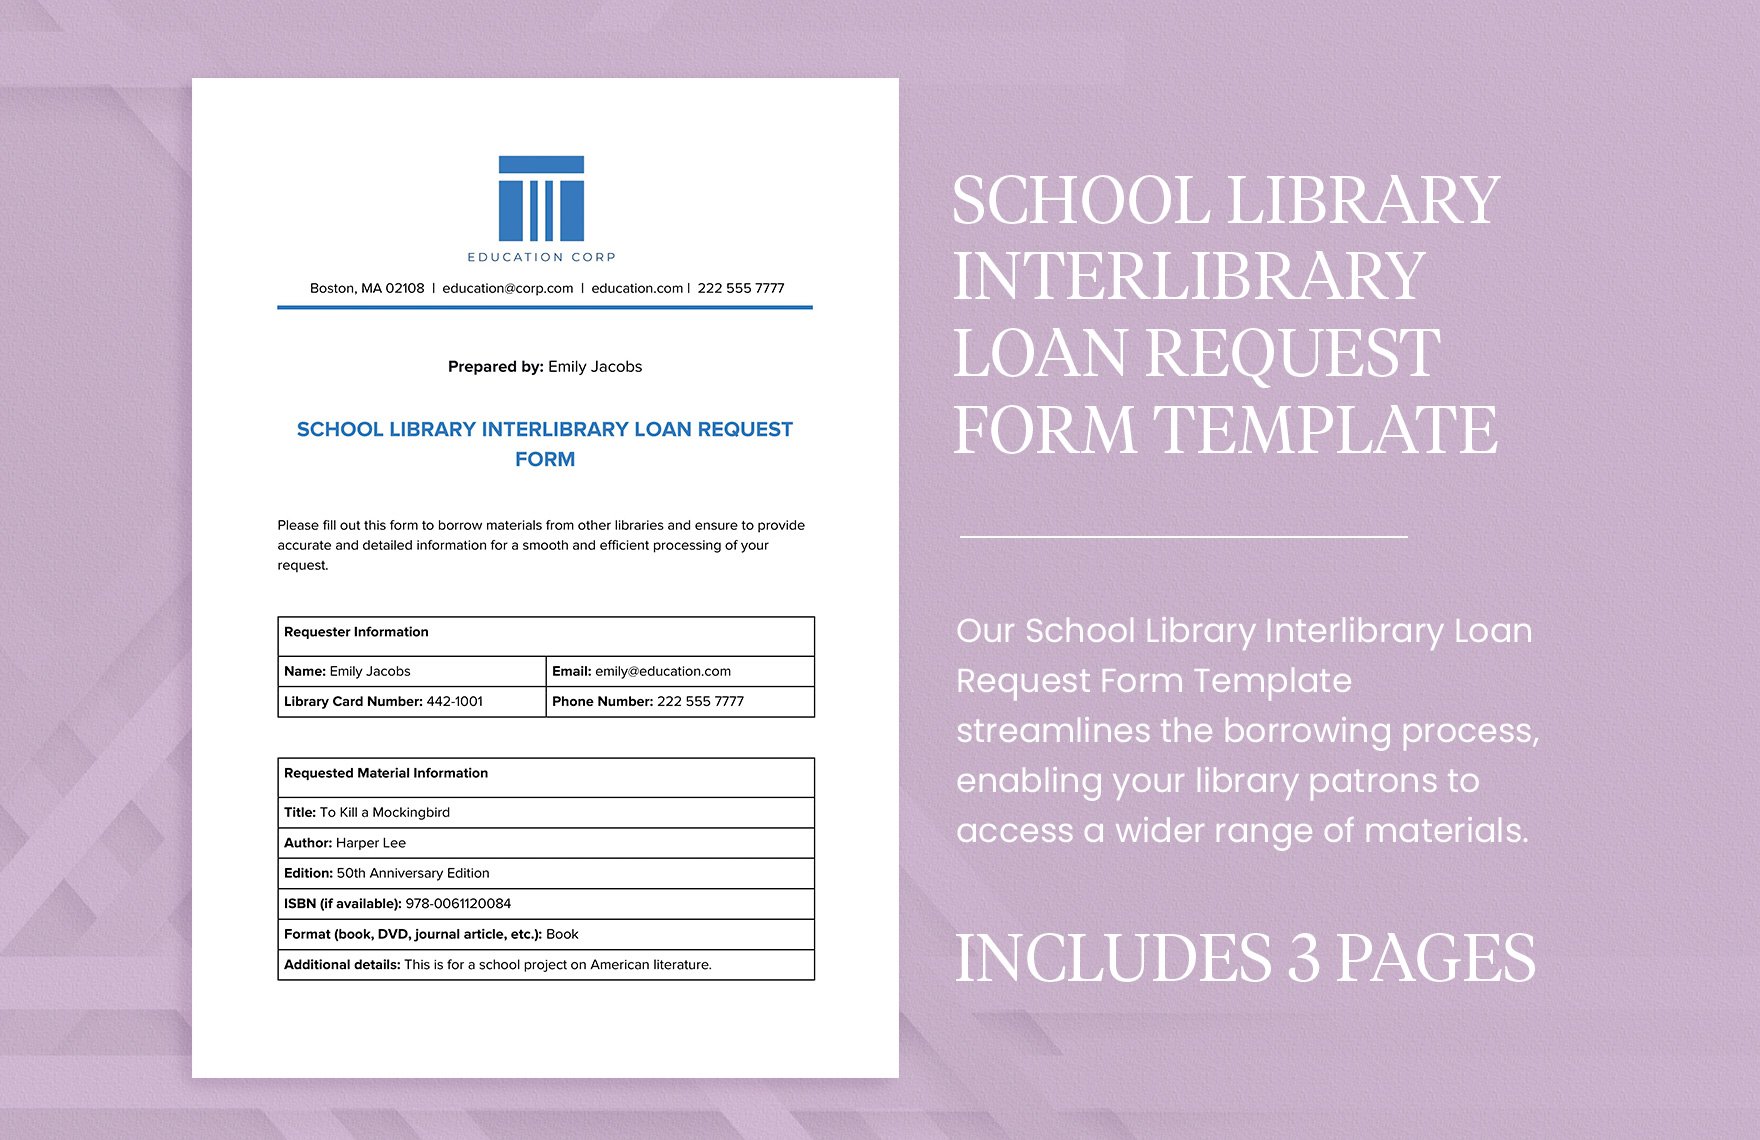 School Library Interlibrary Loan Request Form Template in Word, Google Docs, PDF